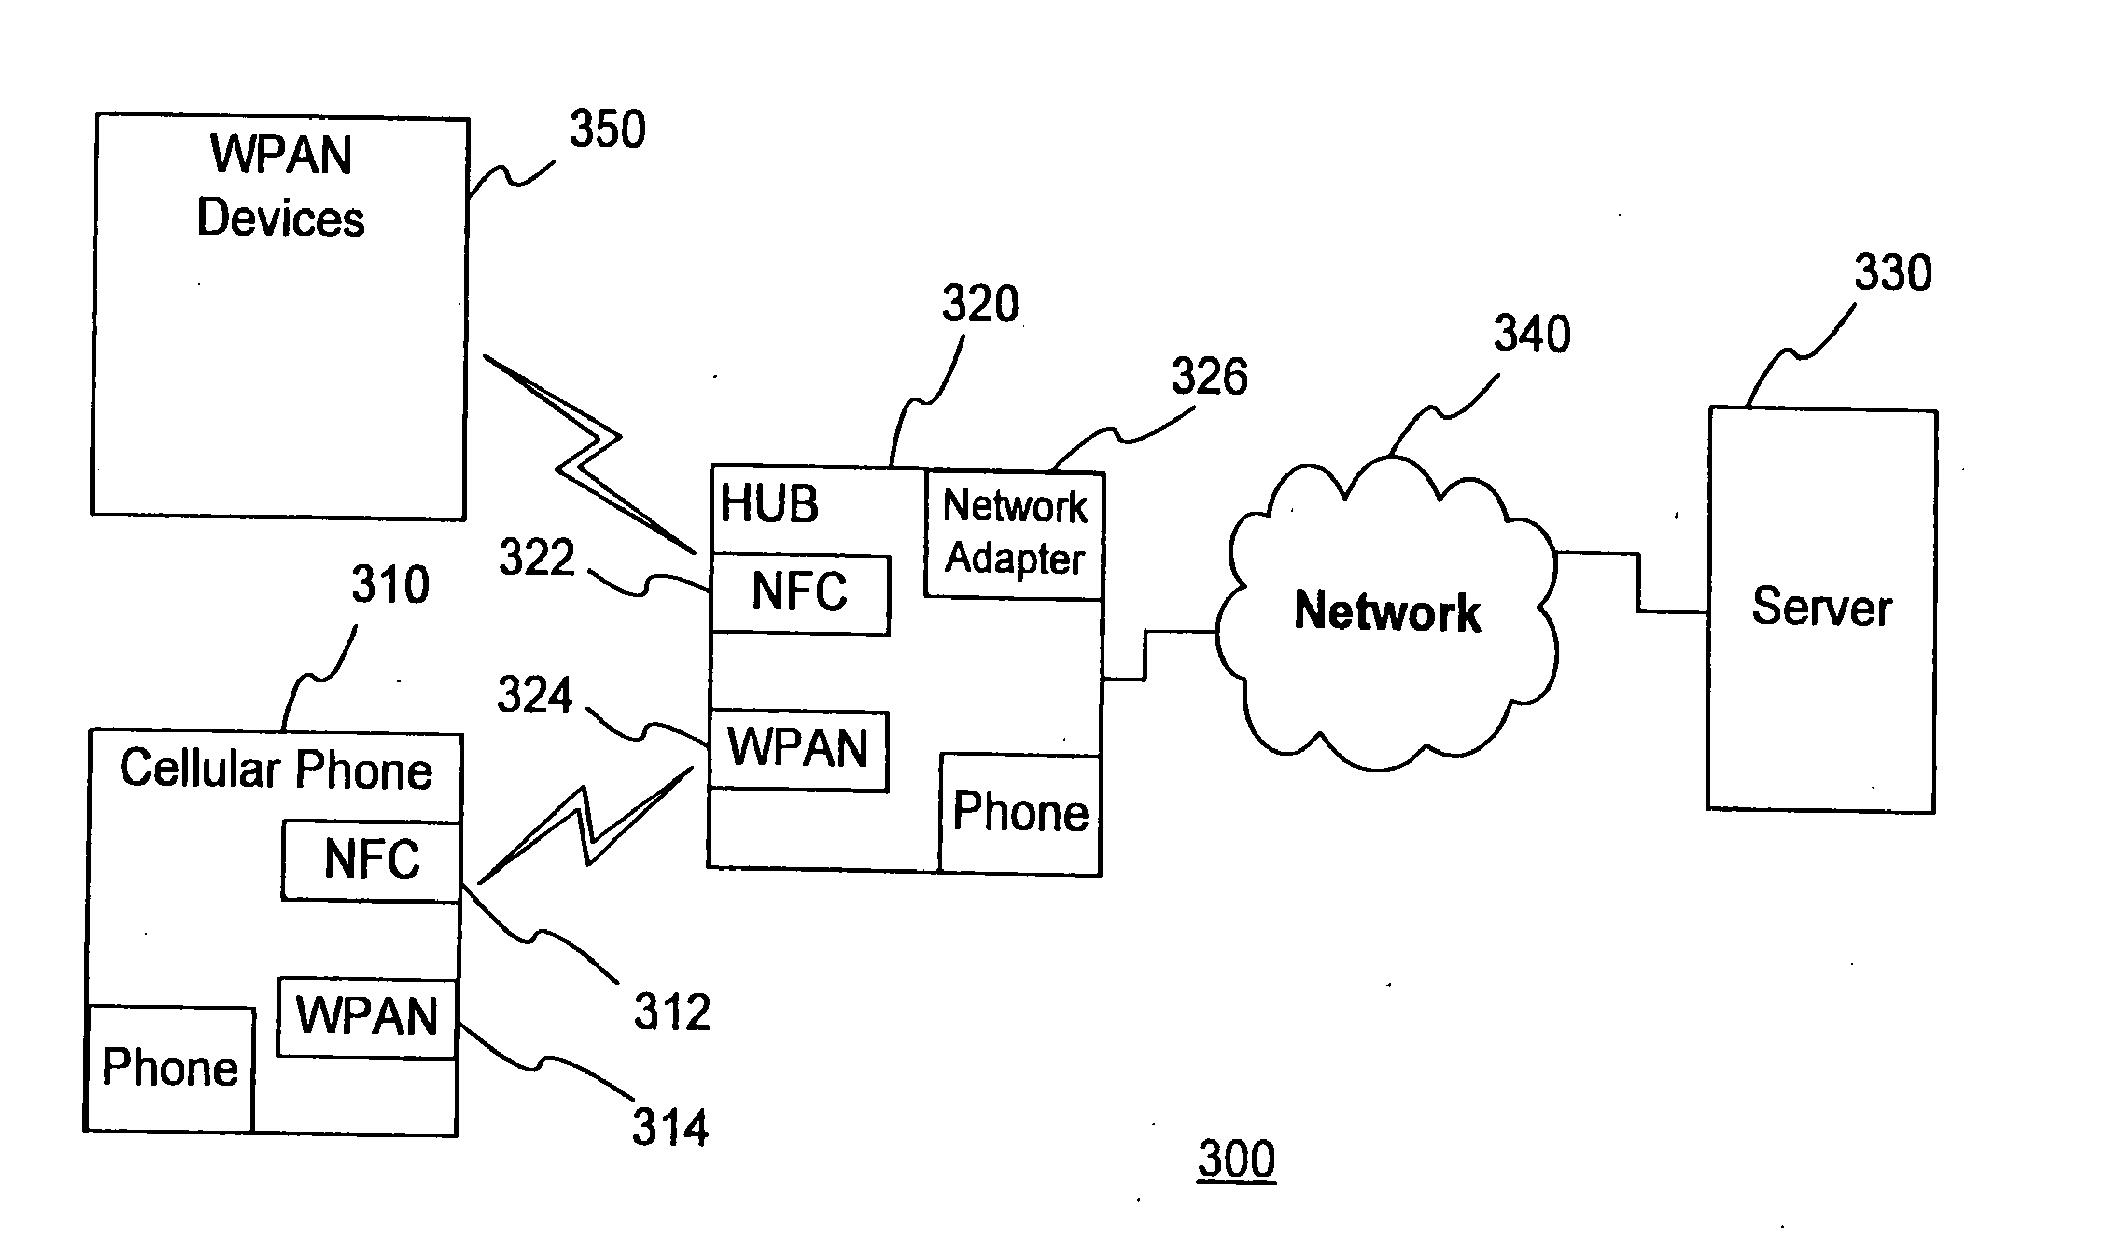 Method and apparatus for multimedia communications with different user terminals